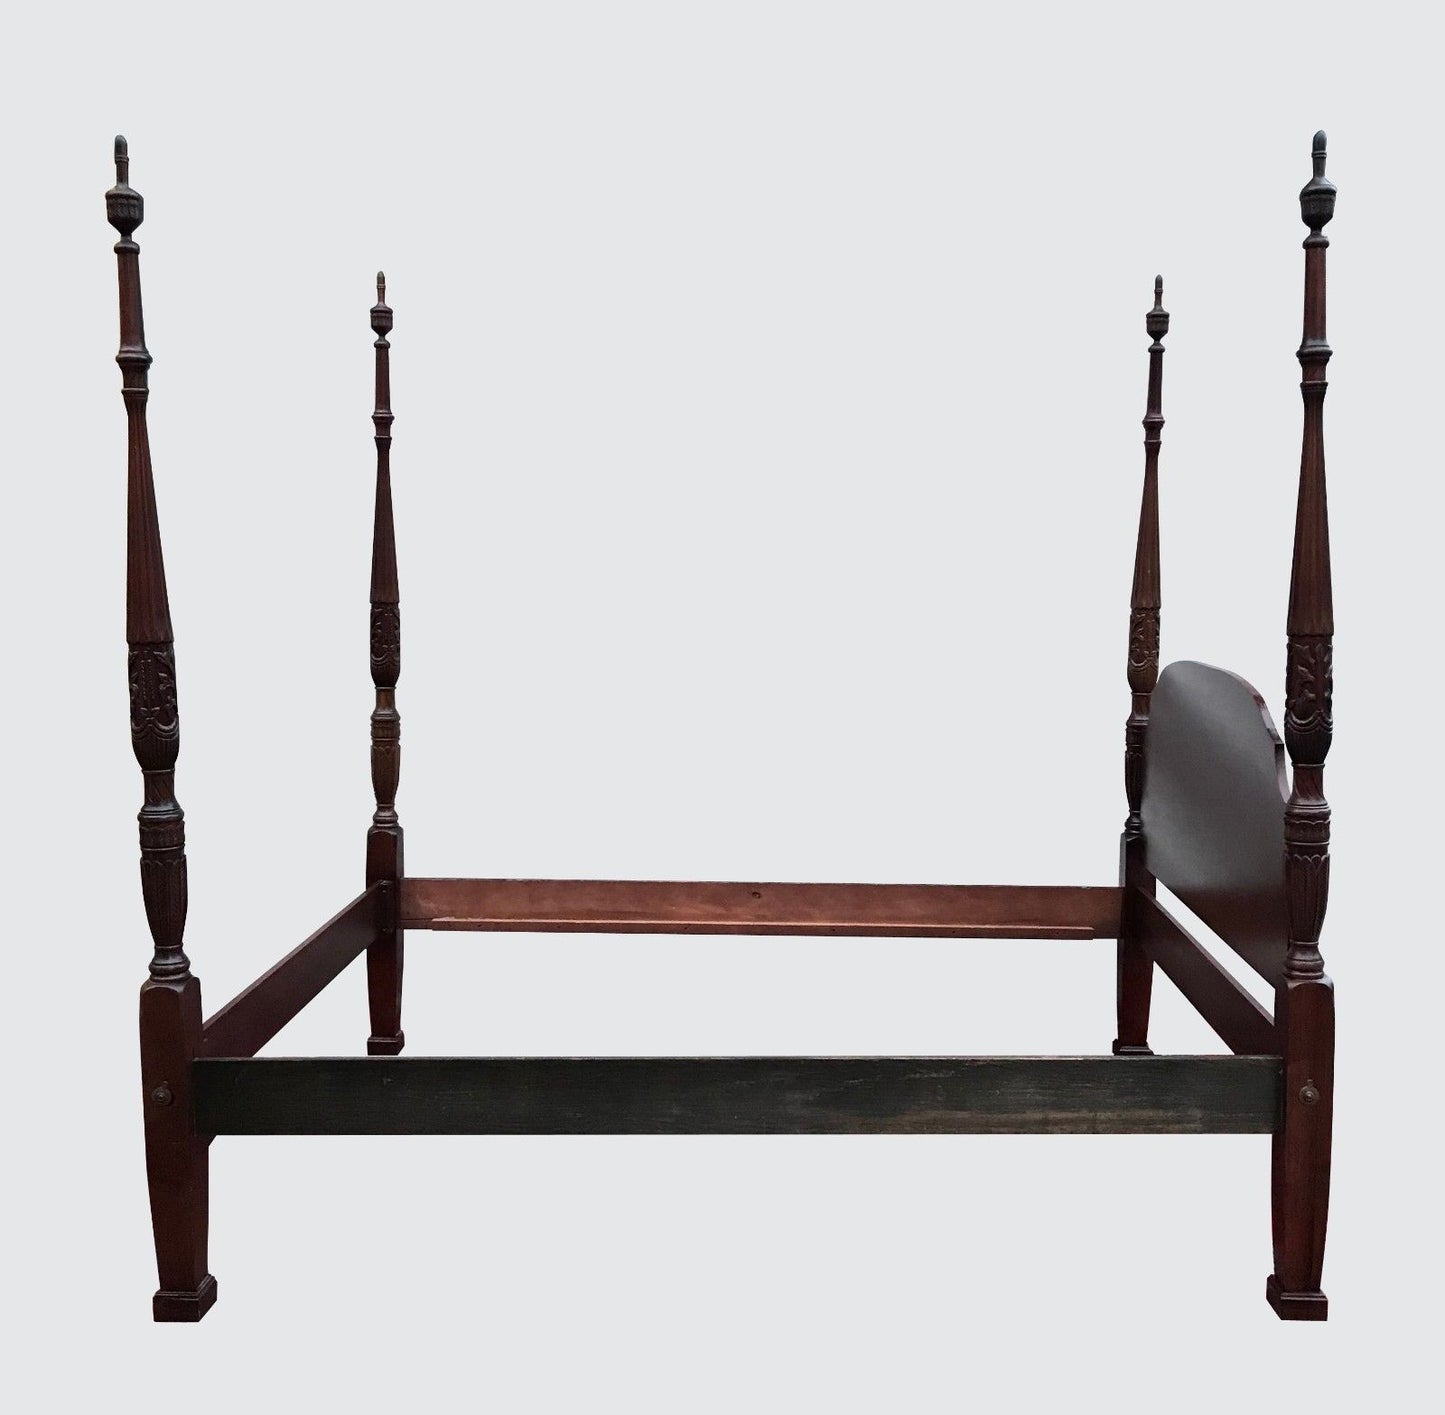 FEDERAL STYLED QUEEN SIZED RICE CARVED CHERRY FOUR POSTER CARVED BED